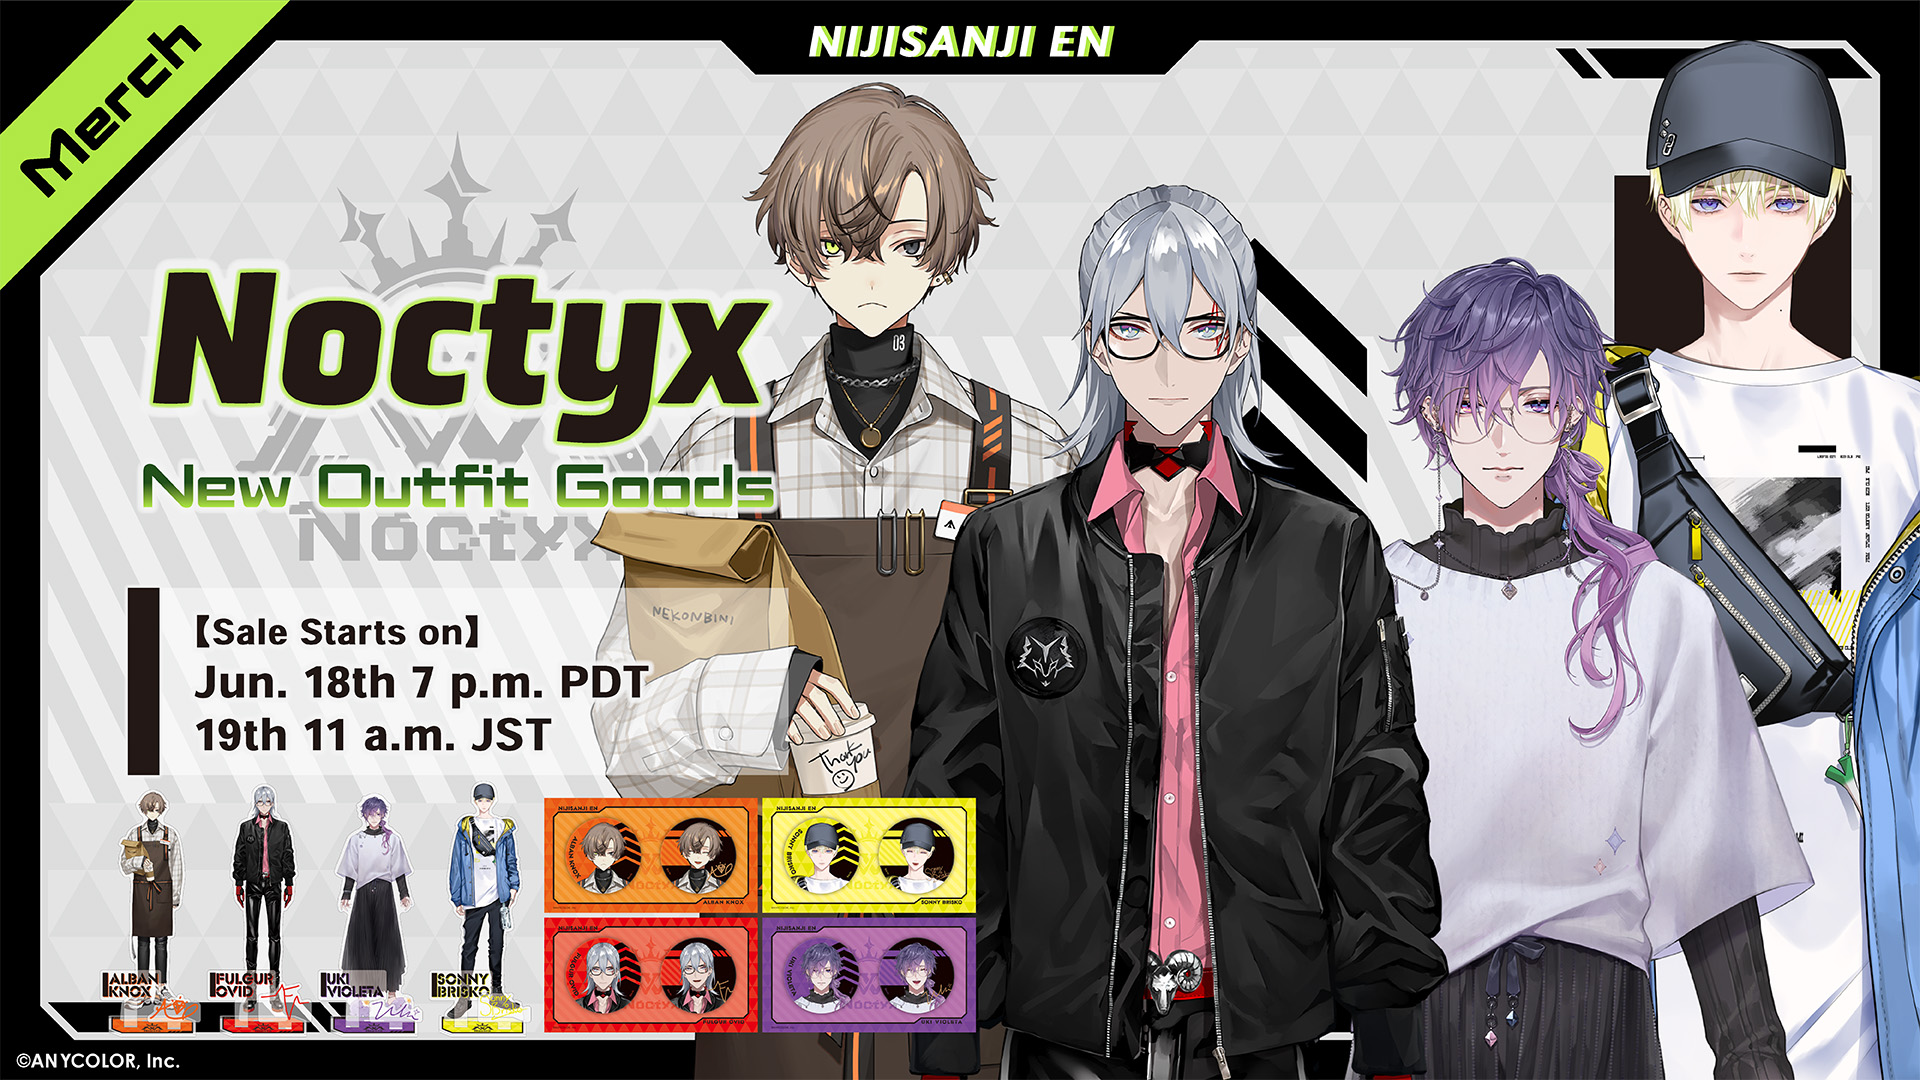 NIJISANJI EN announces “Noctyx New Outfit Goods” | ANYCOLOR株式 